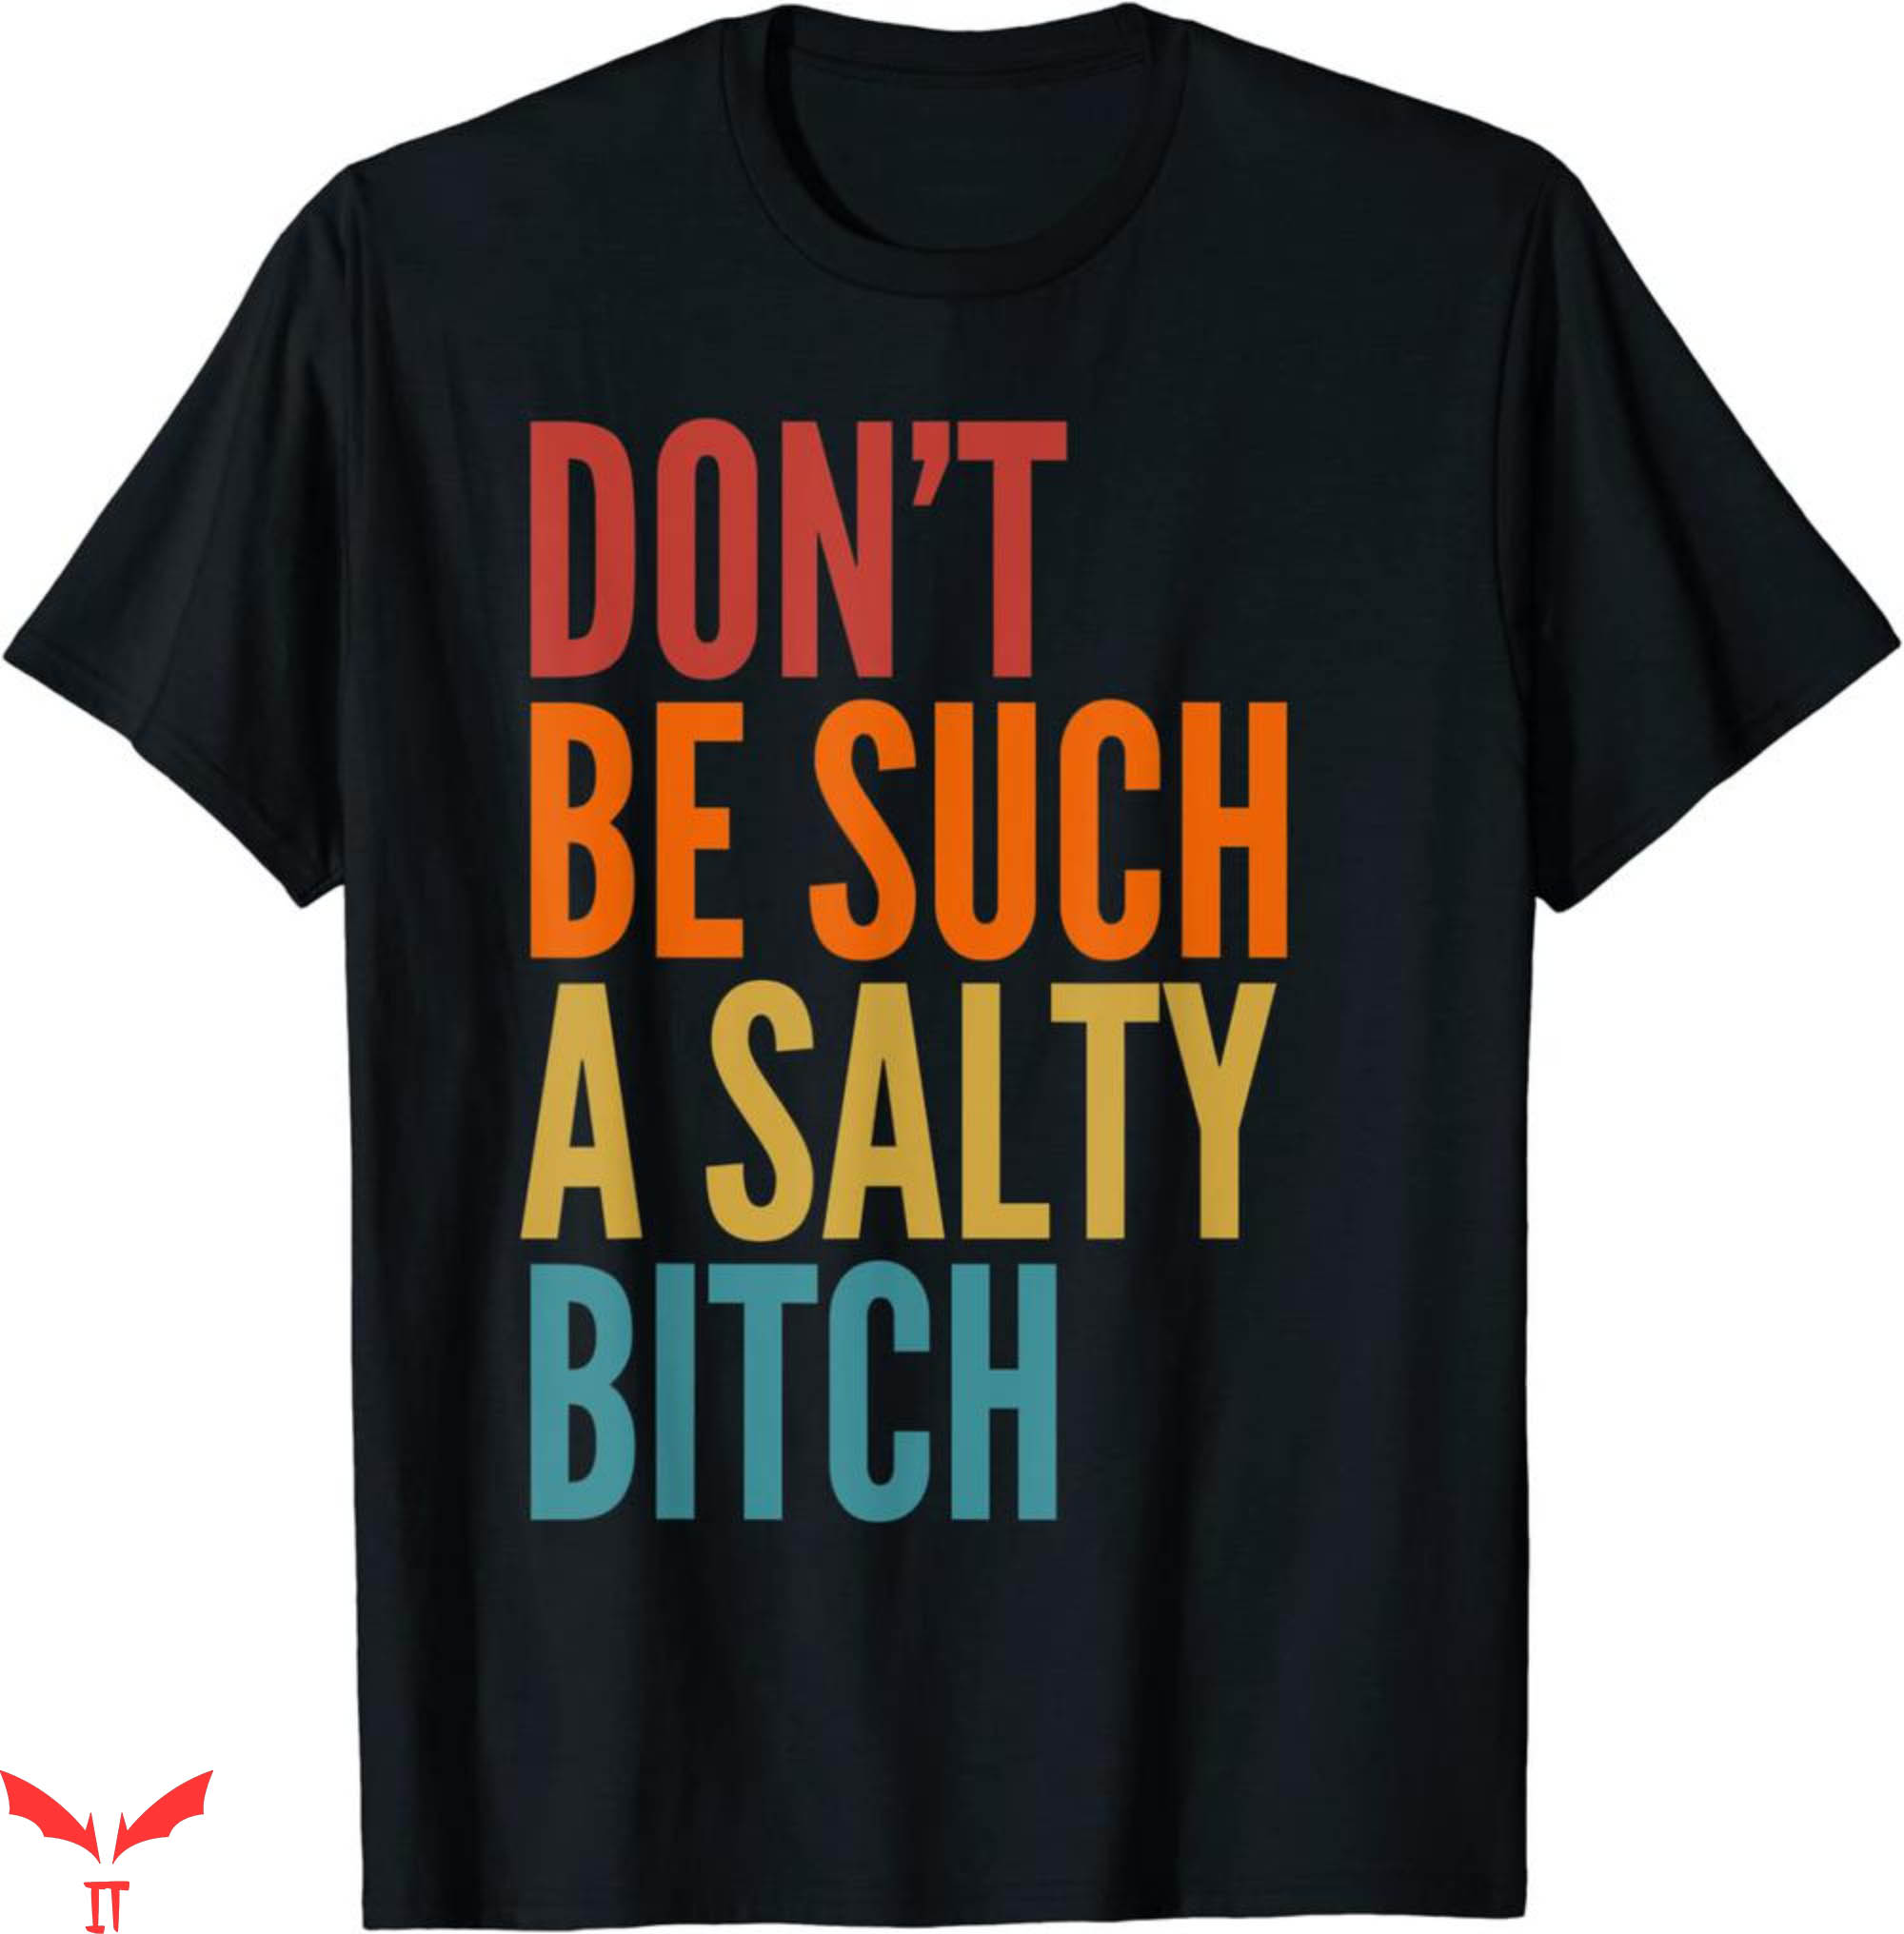 Womens Offensive T-Shirt Vintage Don't Be Such A Salty Bitch